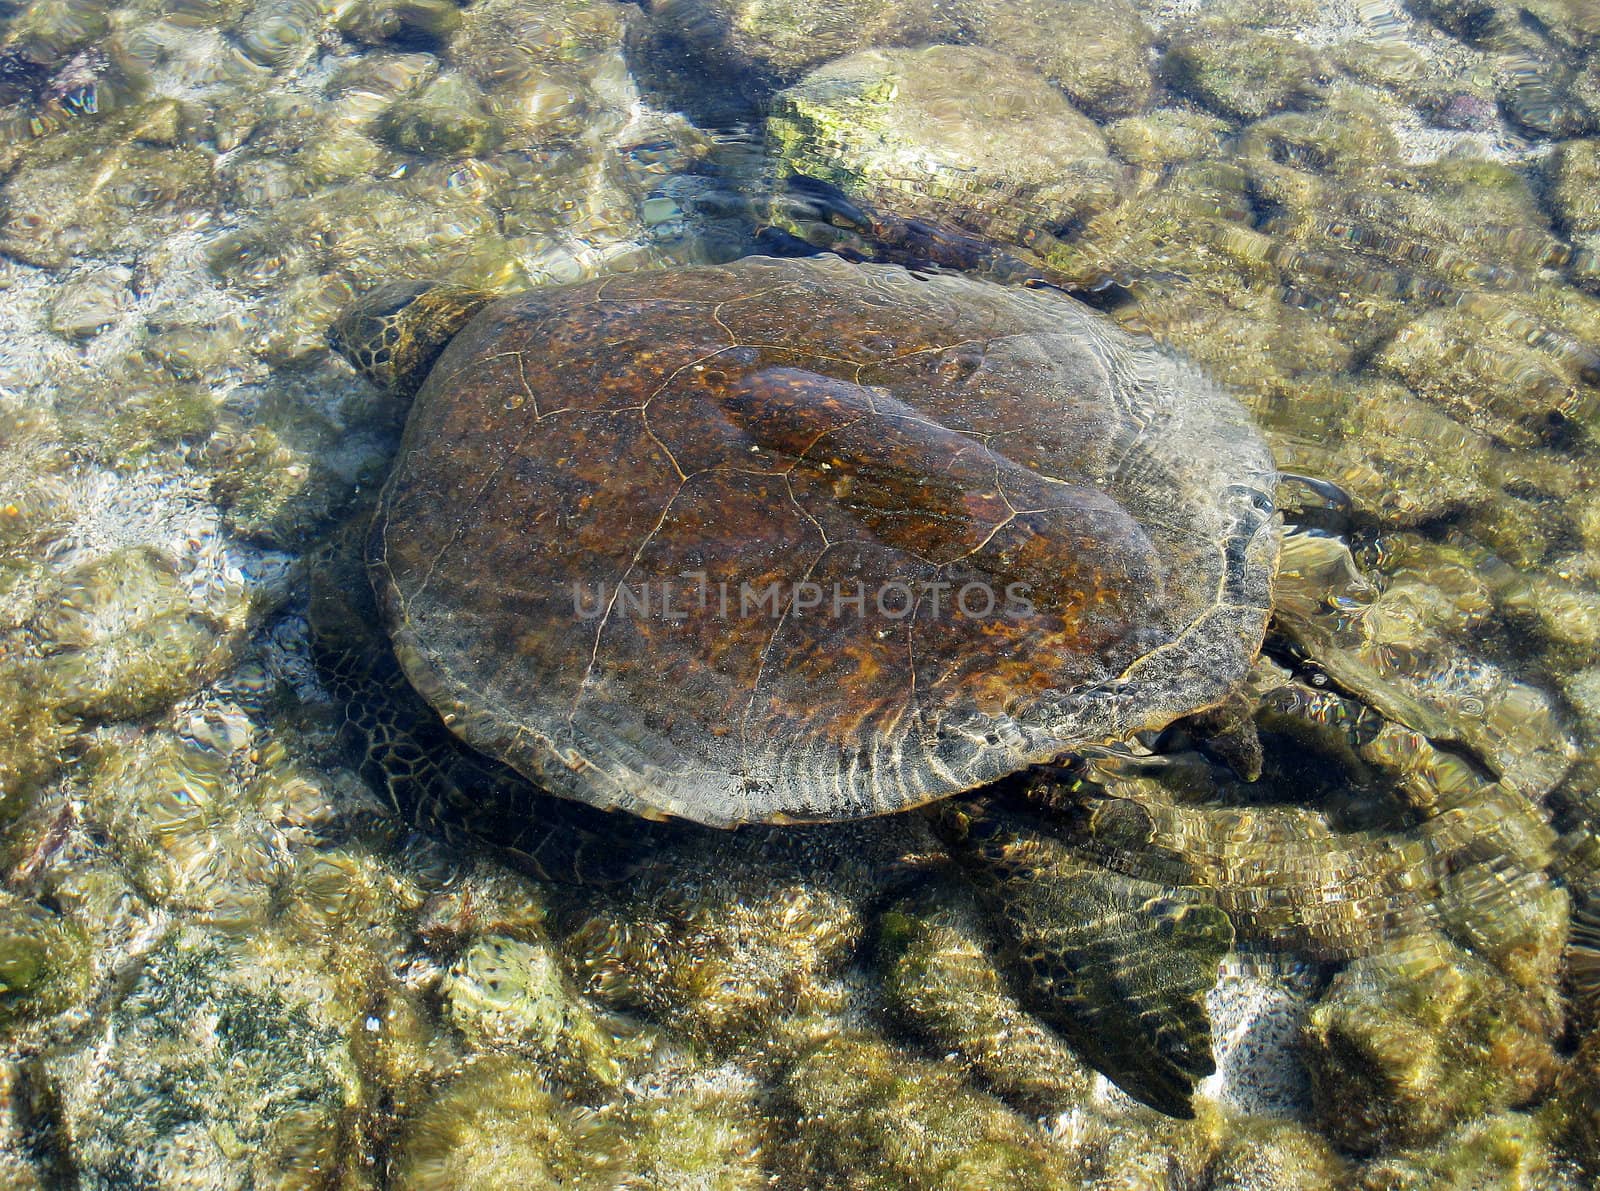 A sea turtle swimming in  shallow water